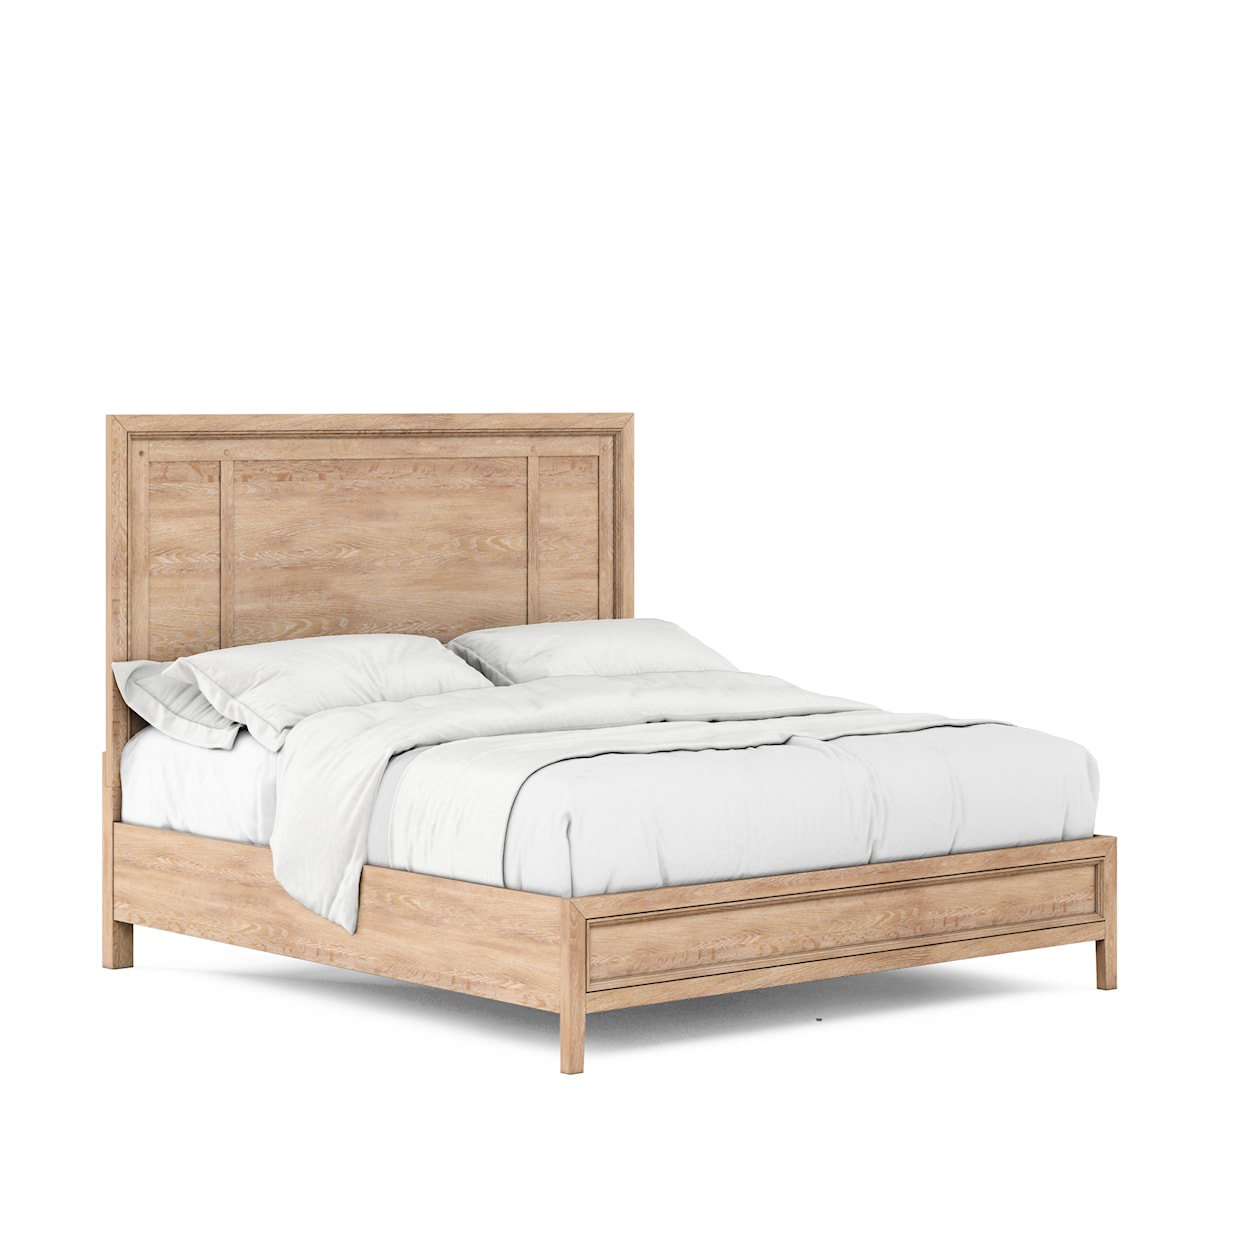 A.R.T. Furniture Inc Post California King Panel Bed